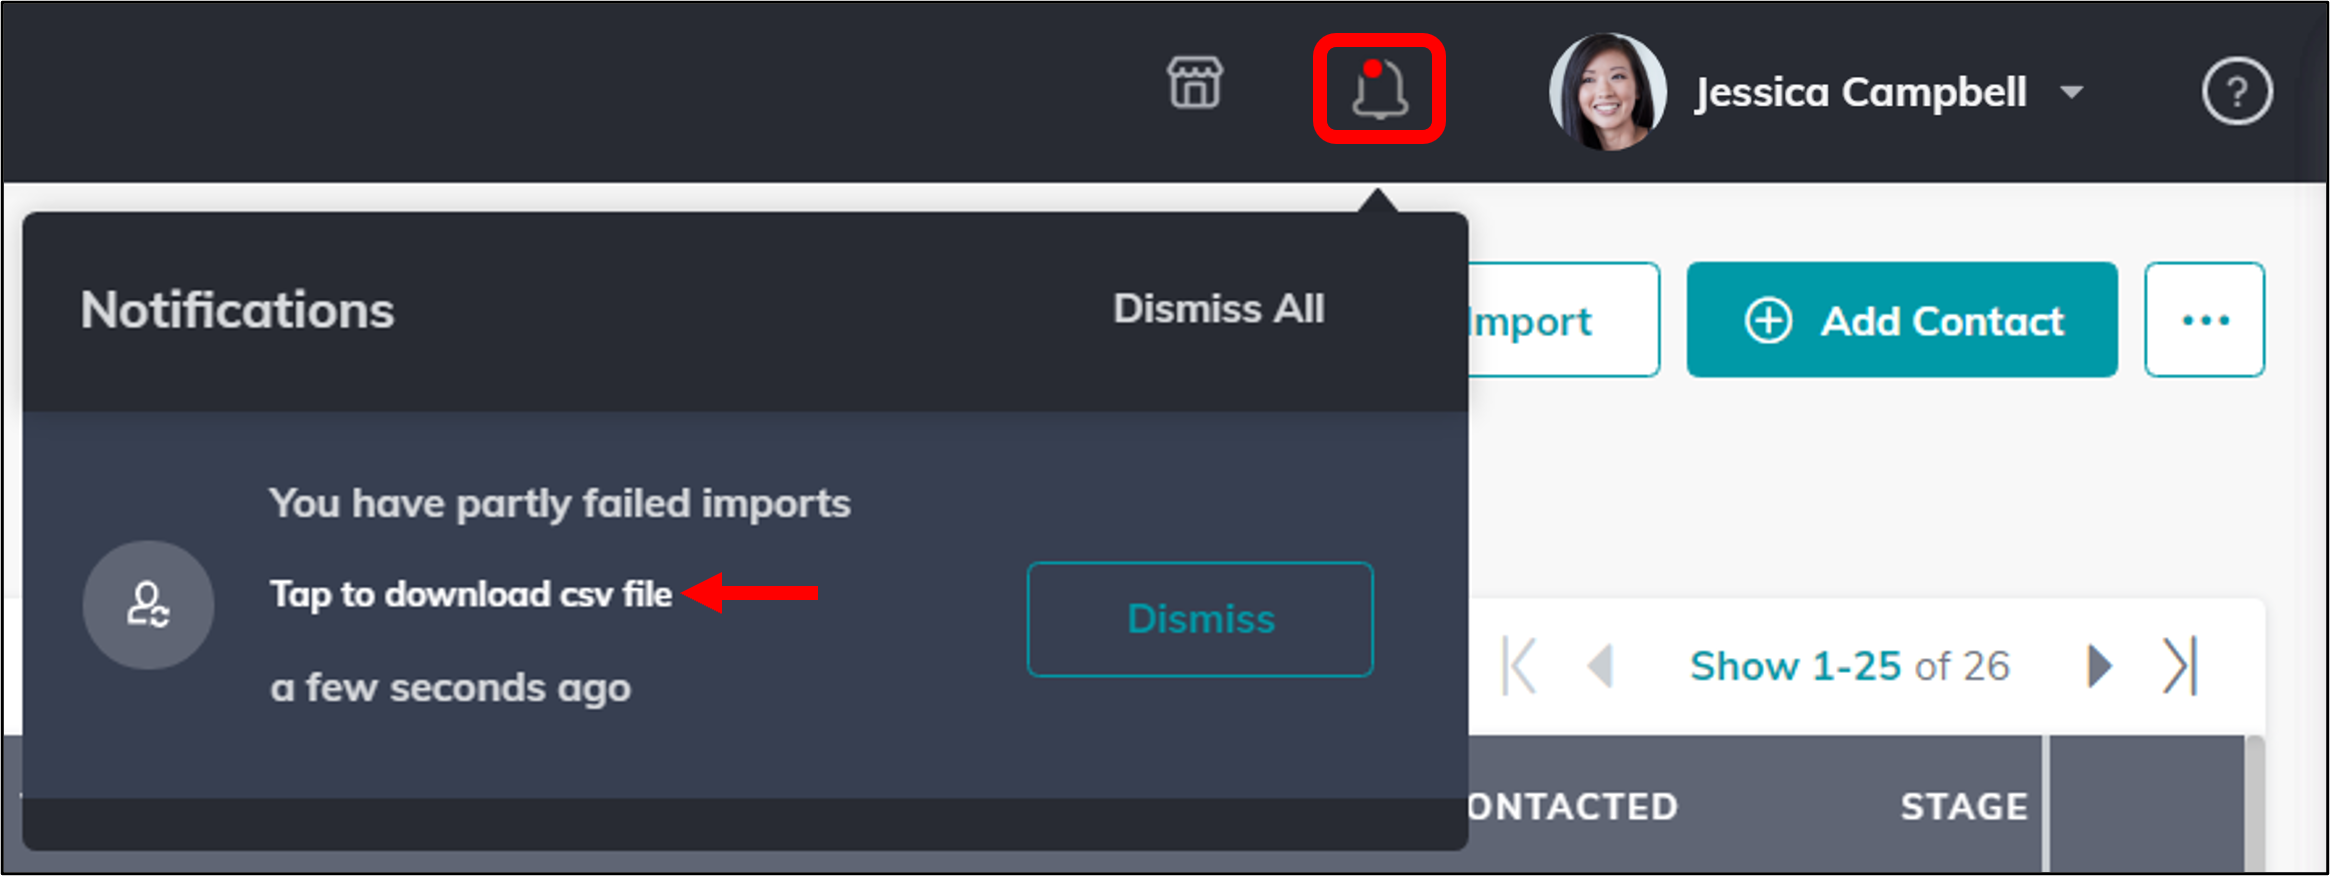 contacts_notification_for_import.png